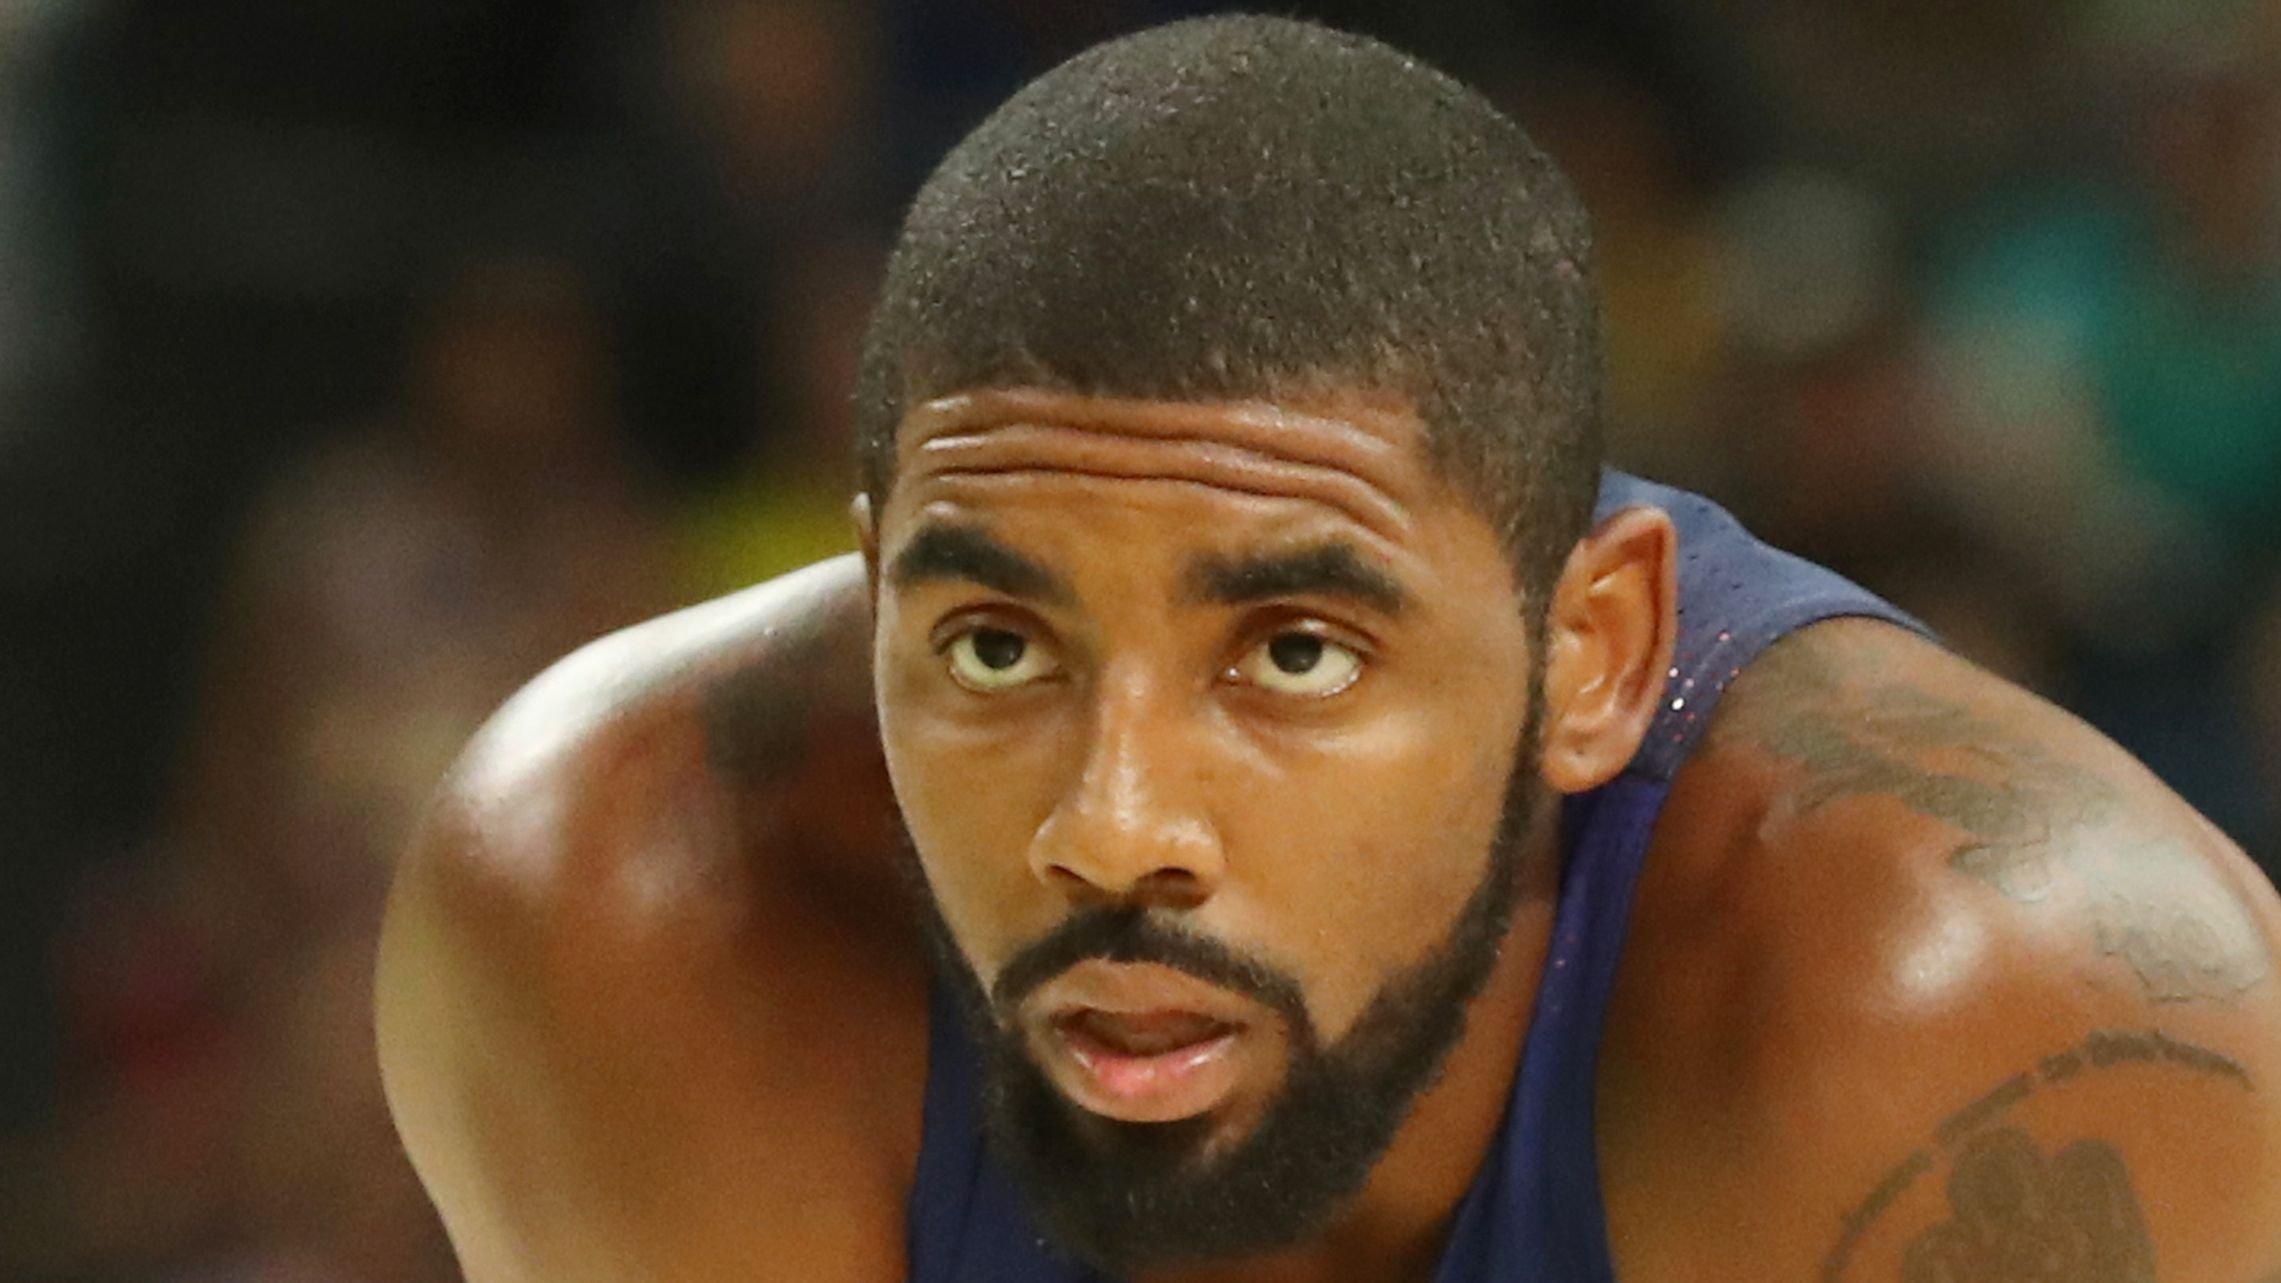 Close up of Kyrie Irving on the court in TEAM USA's jersey